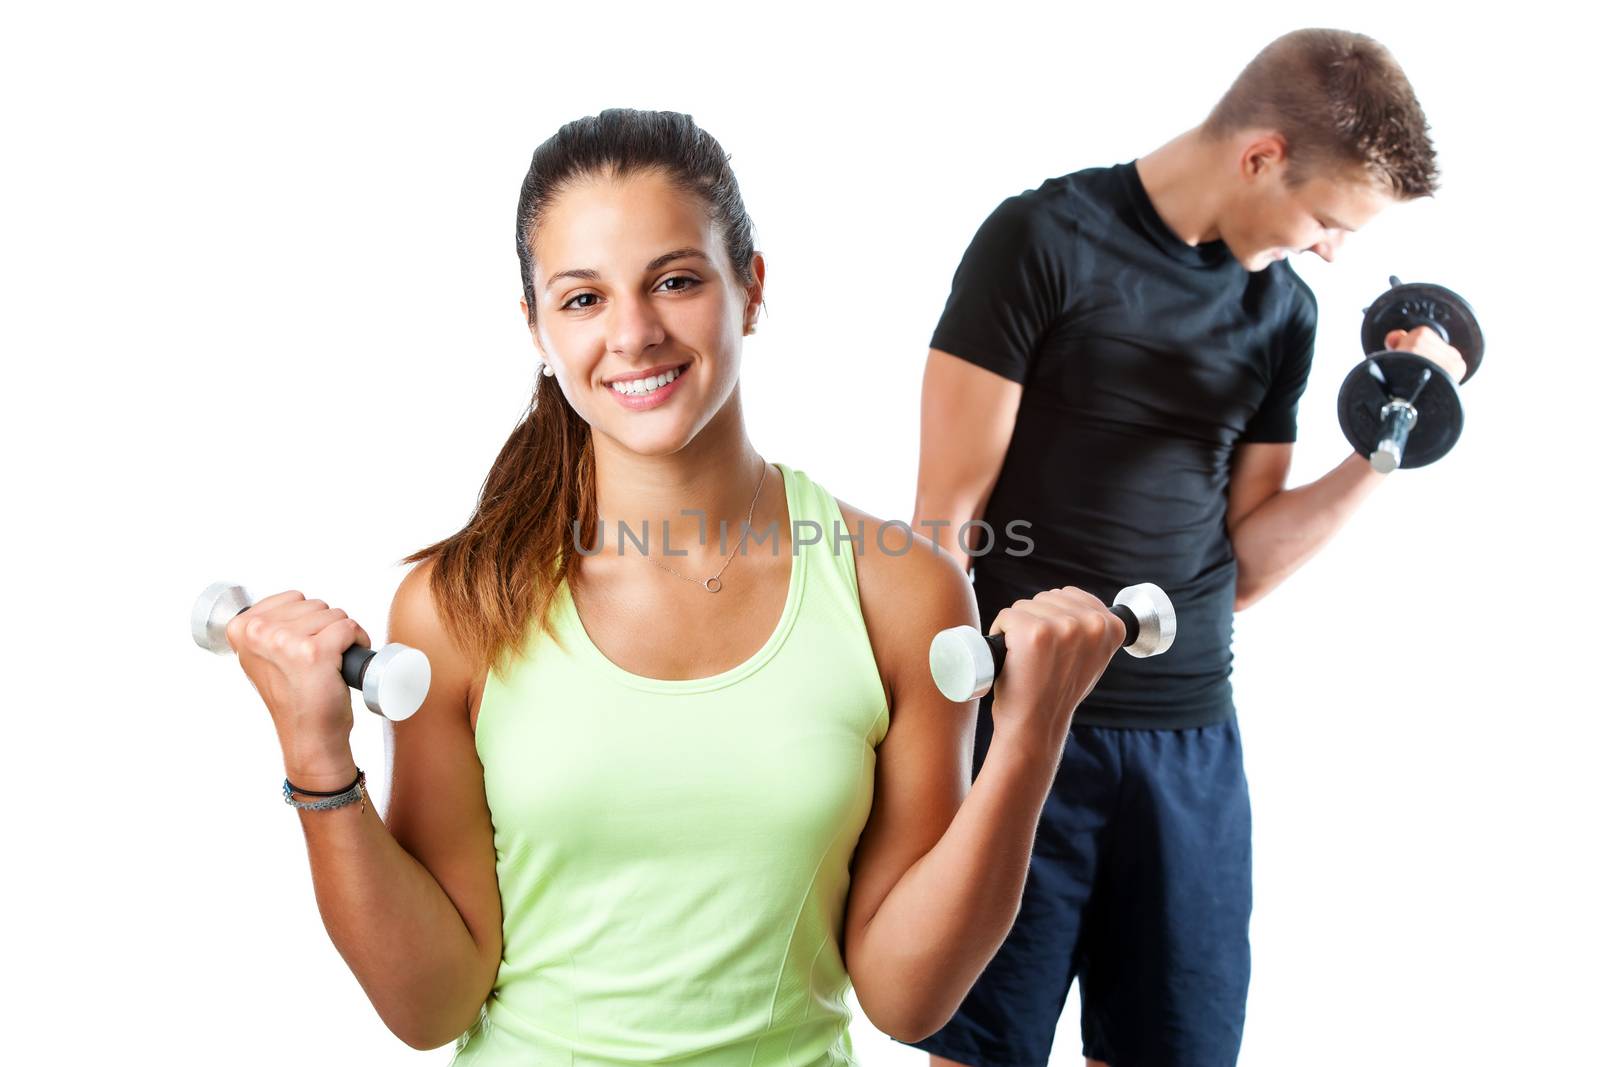 Close up portrait of attractive teen girl doing aerobic workout with boy in background. Isolated on white background.